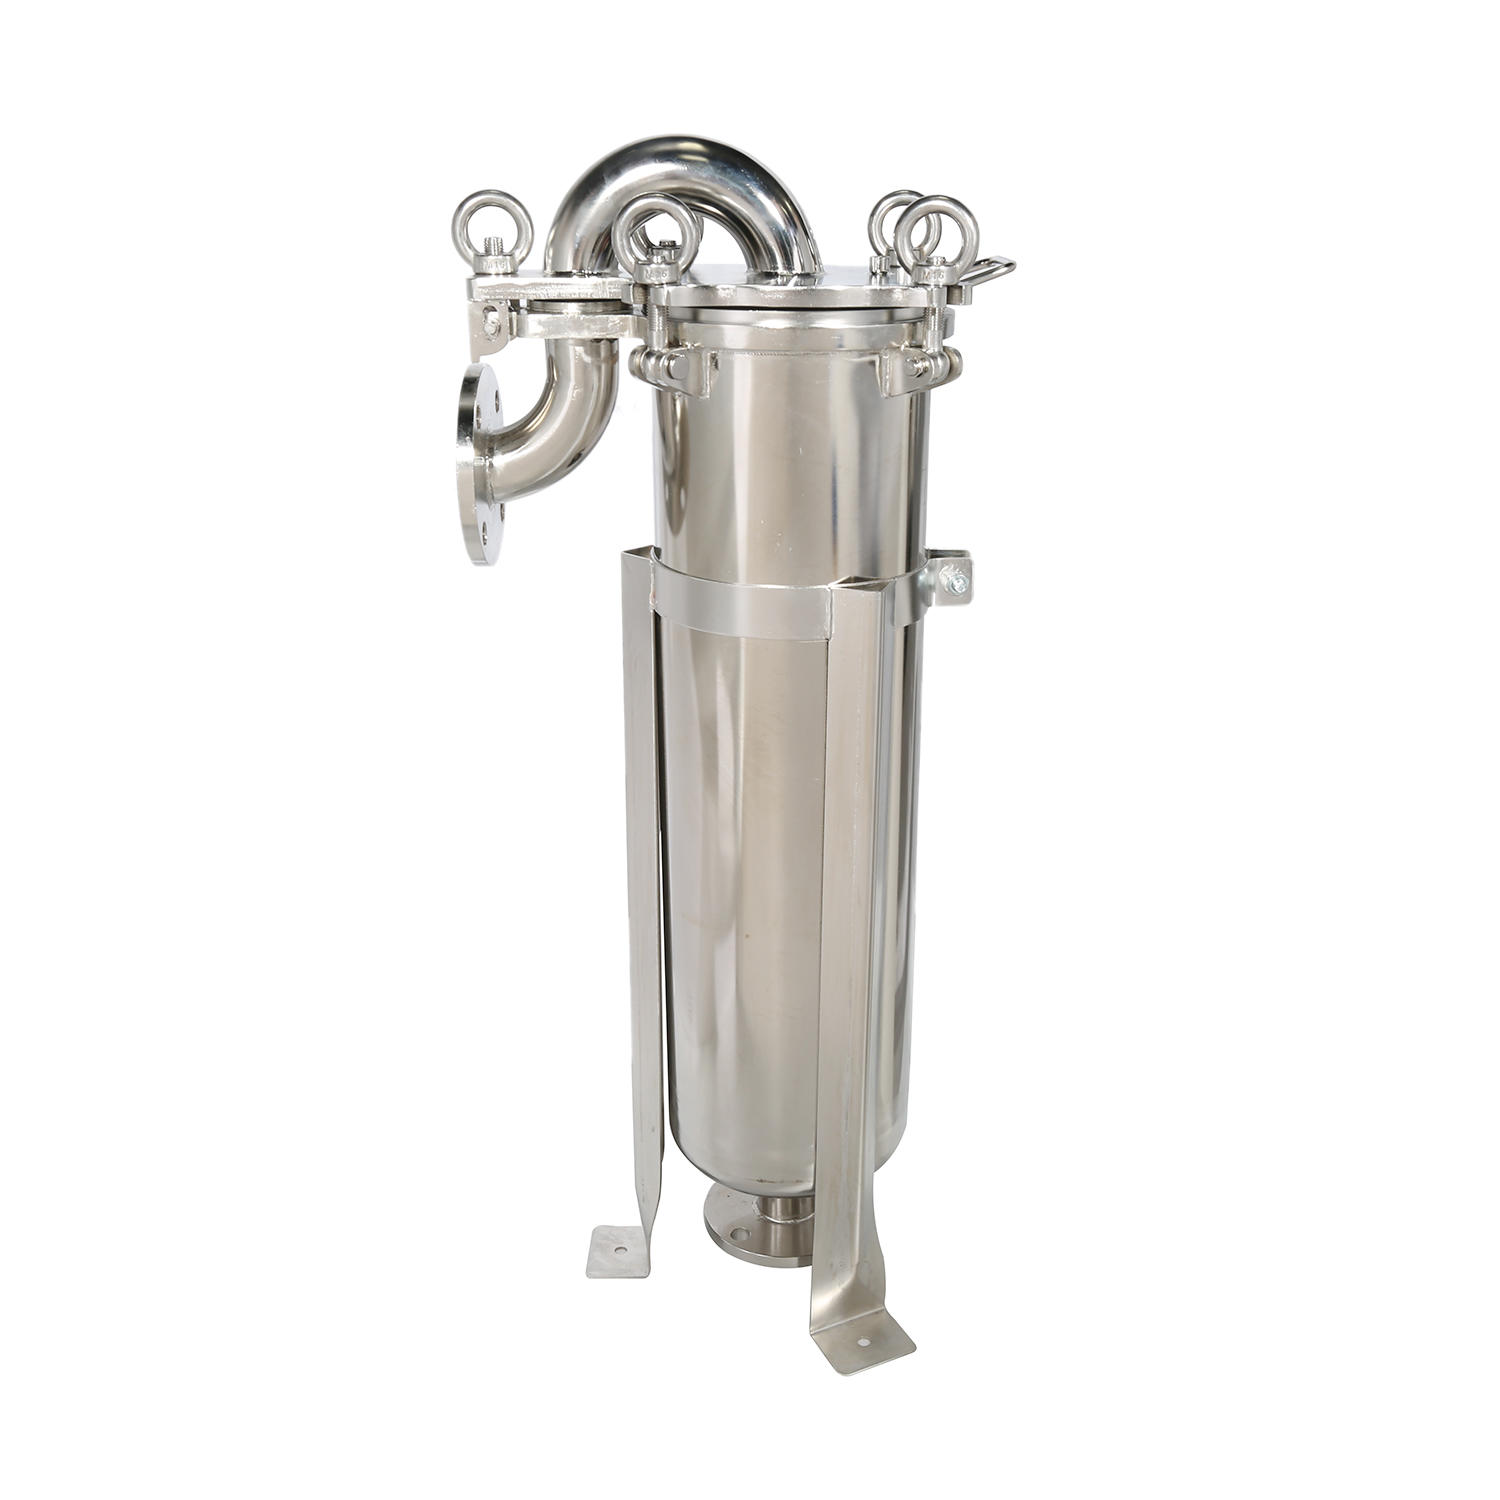 Industrial ss 304 316 316L Stainless Steel Cartridge Filter Housing with 10'' 20'' 30'' 40'' Length